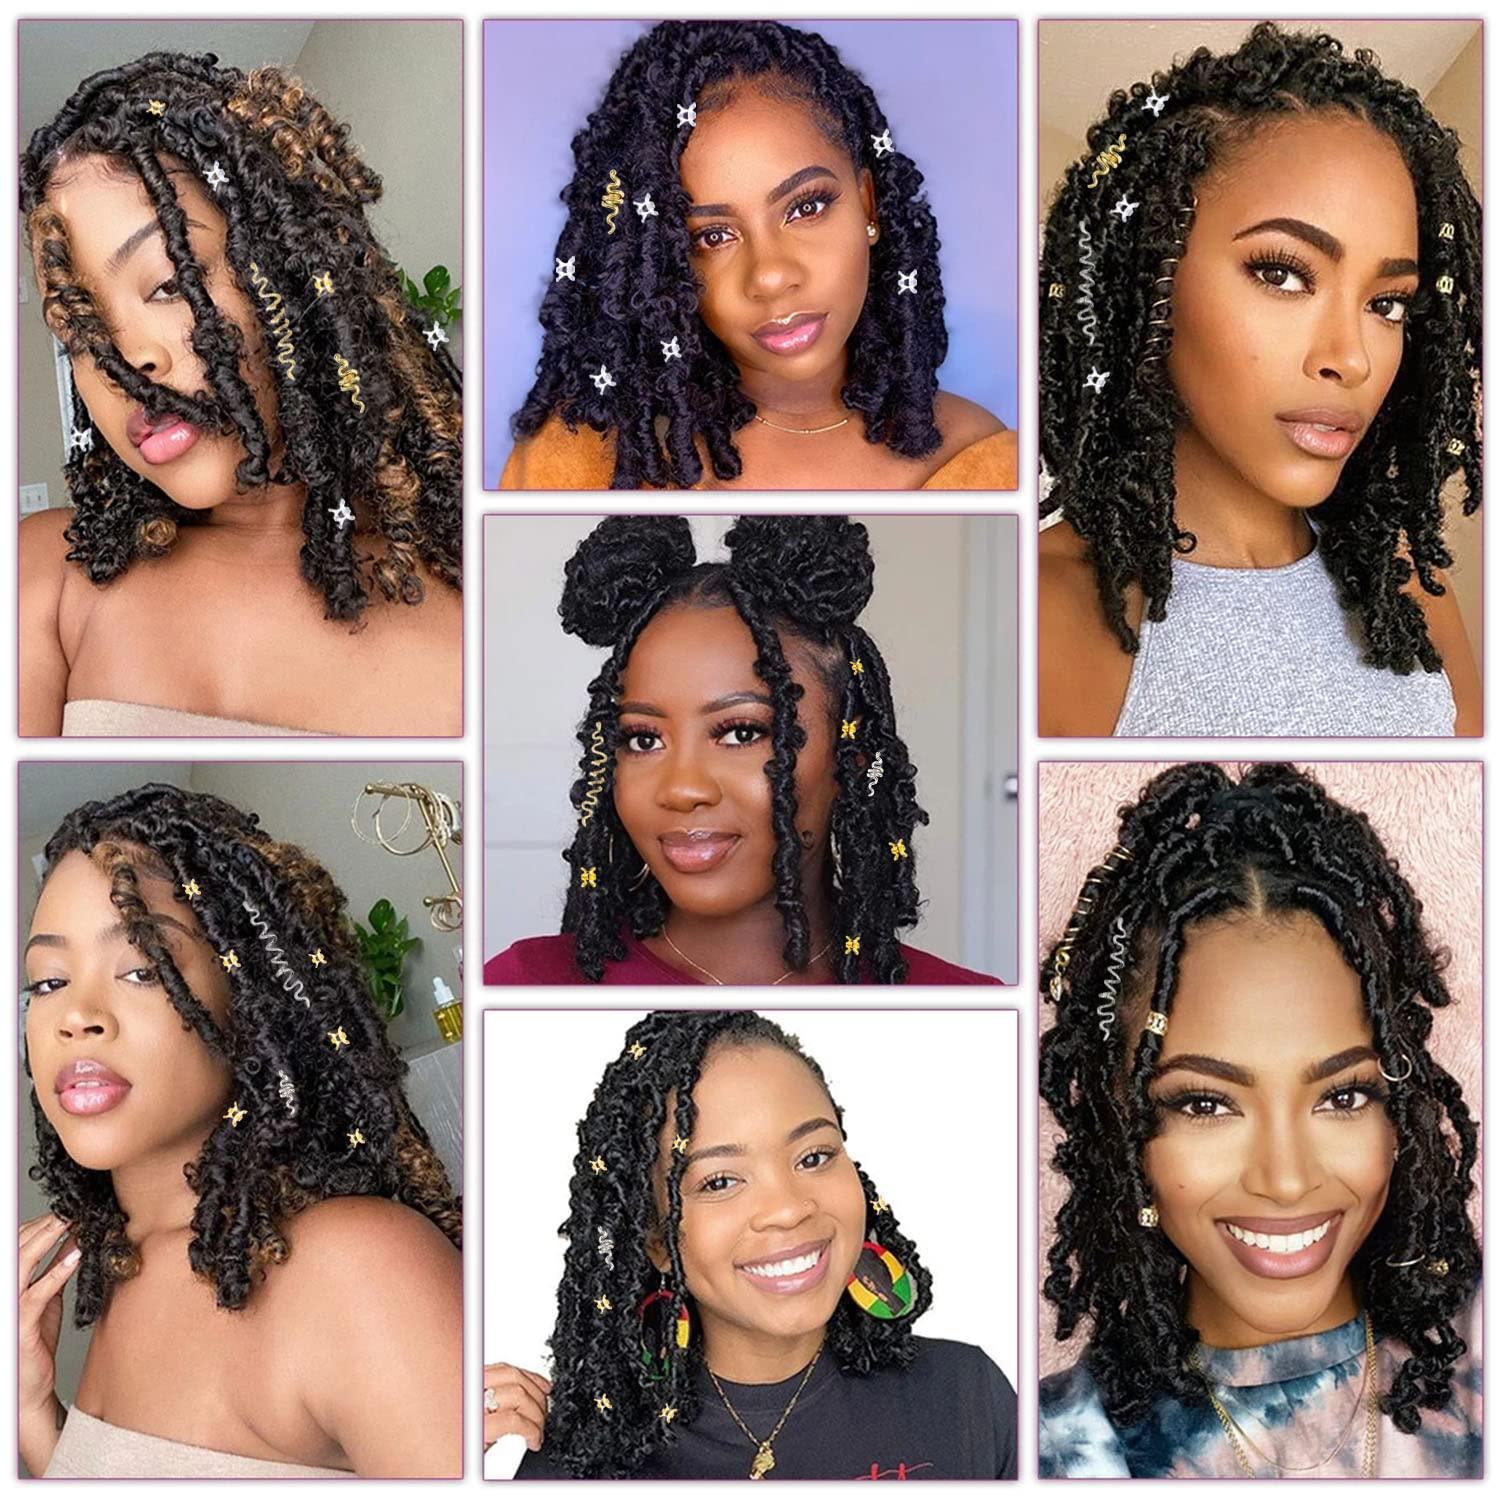 Loc and Natural Hair Accessories for your Wedding Day